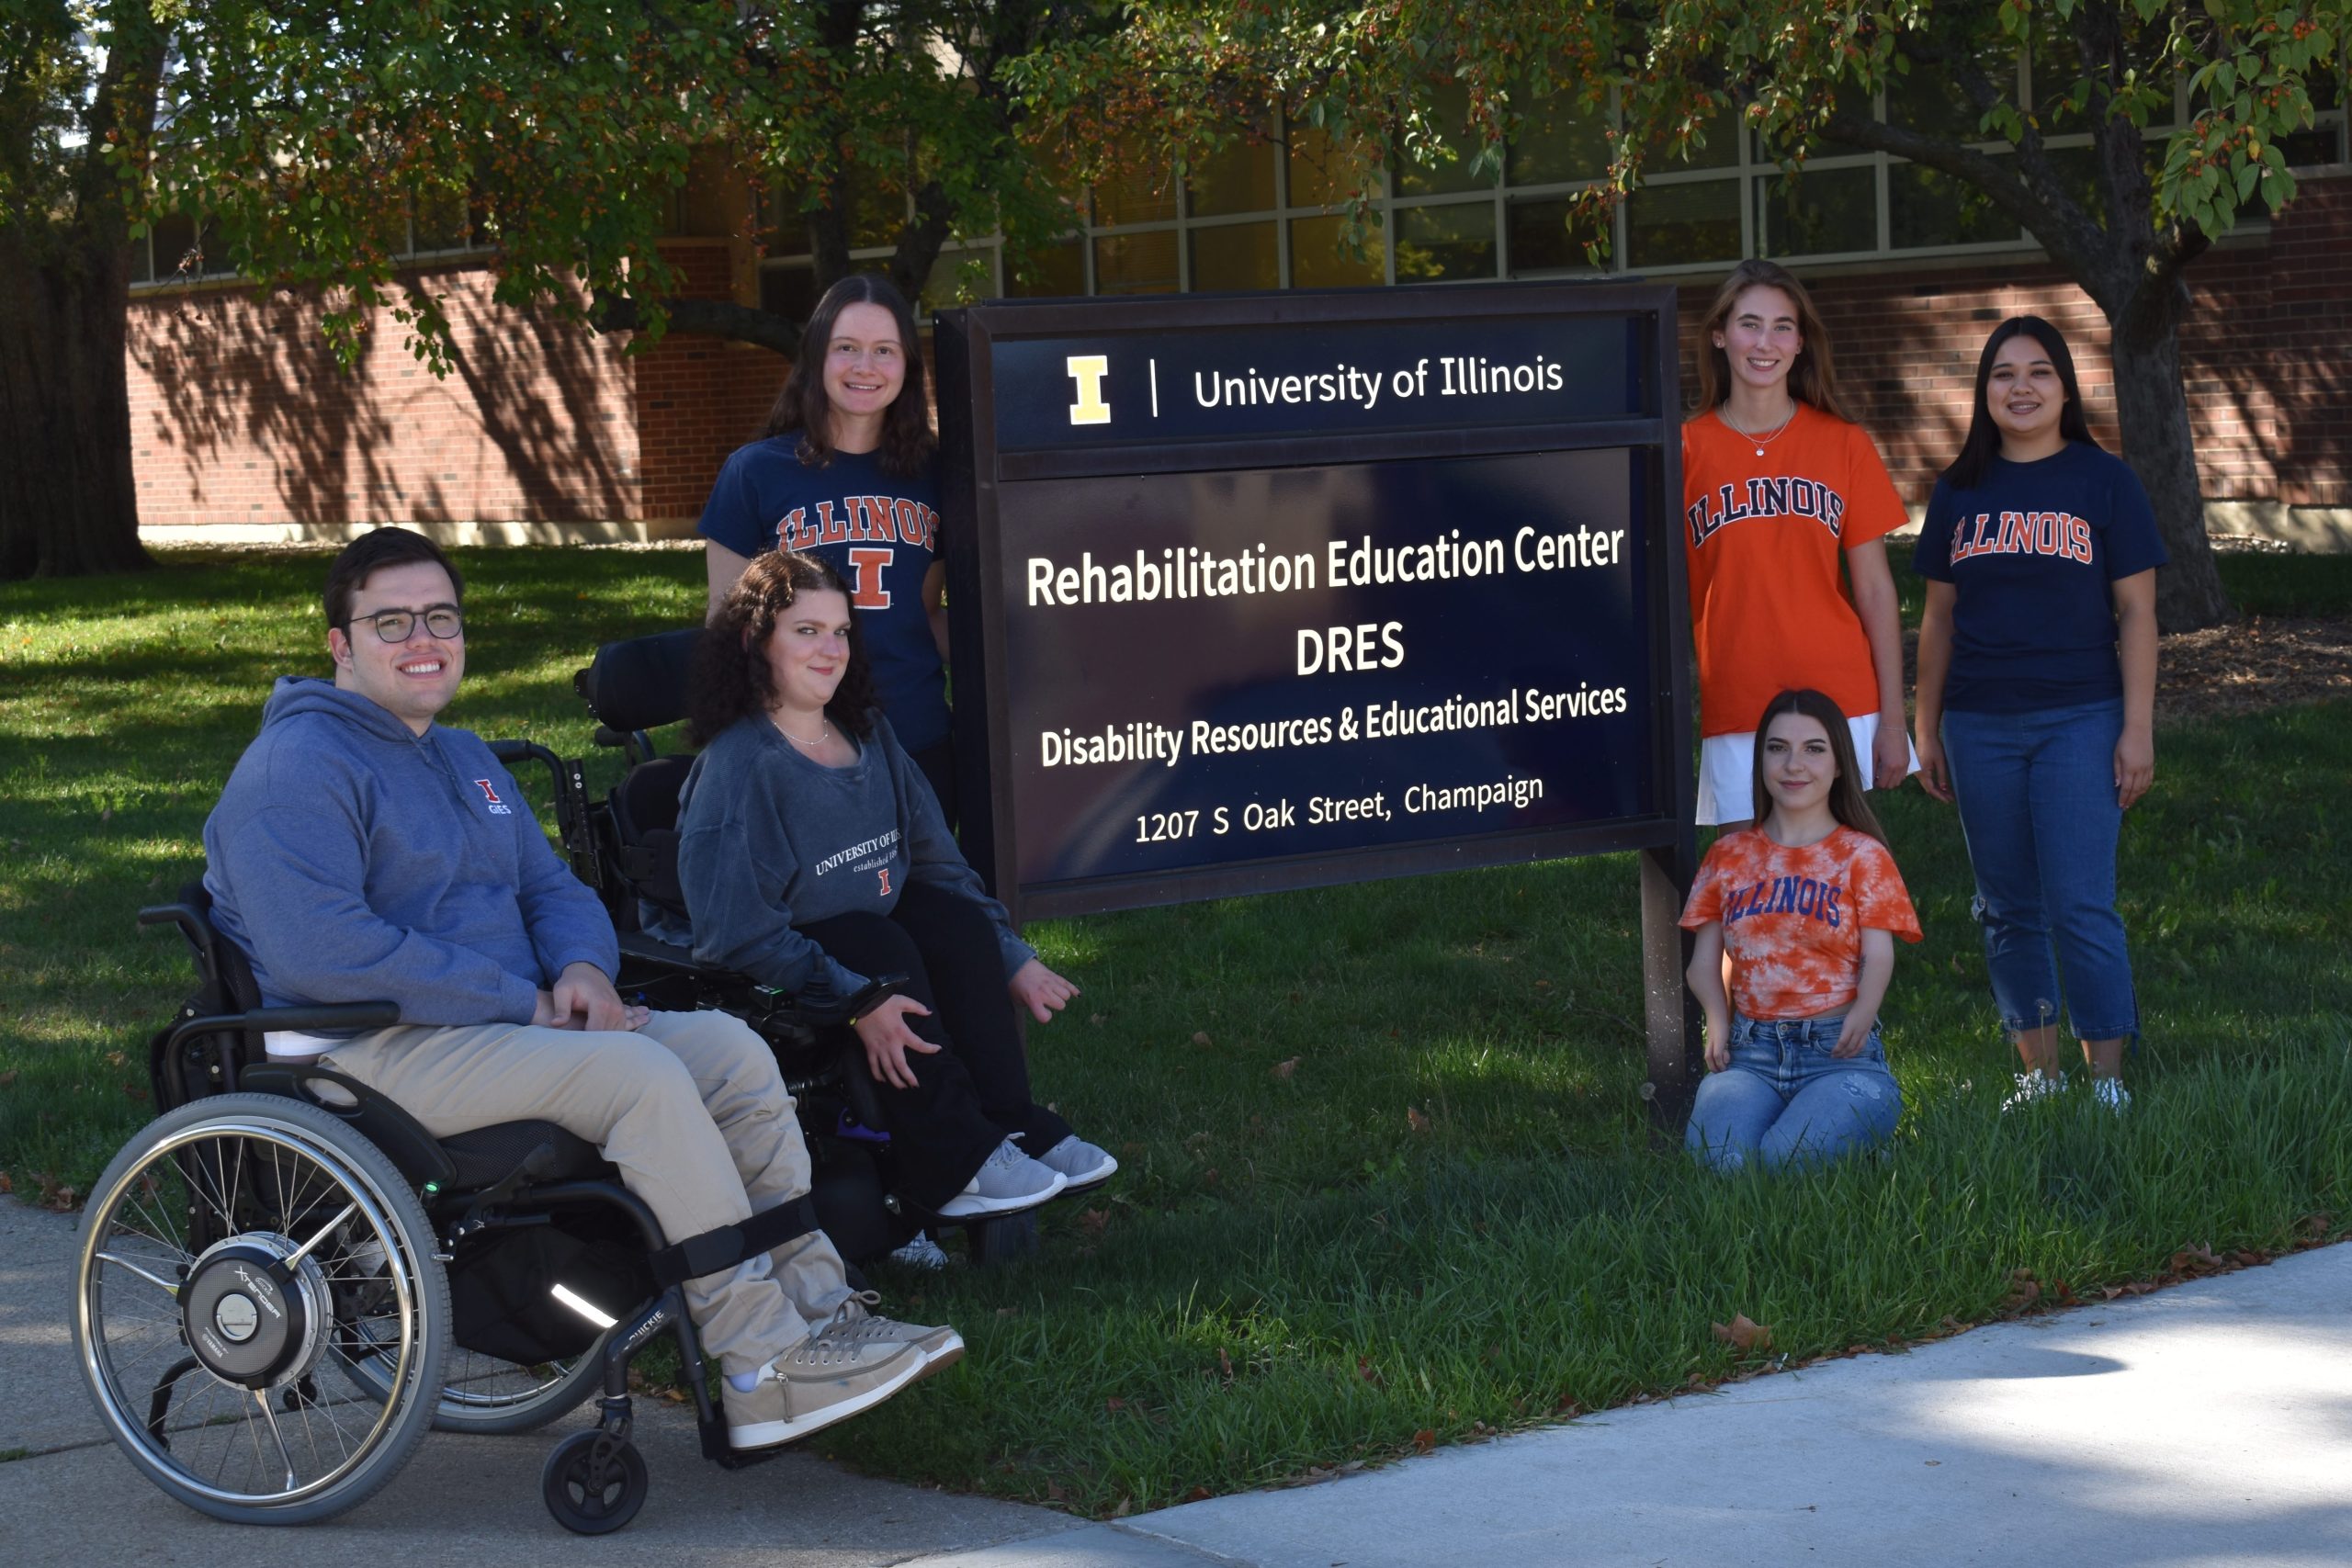 6 people gather around sign outside of a building. Text on sign:
 University of Illinois
Rehabilitation Education Center
DRES
1207 S Oak Street, Champaign